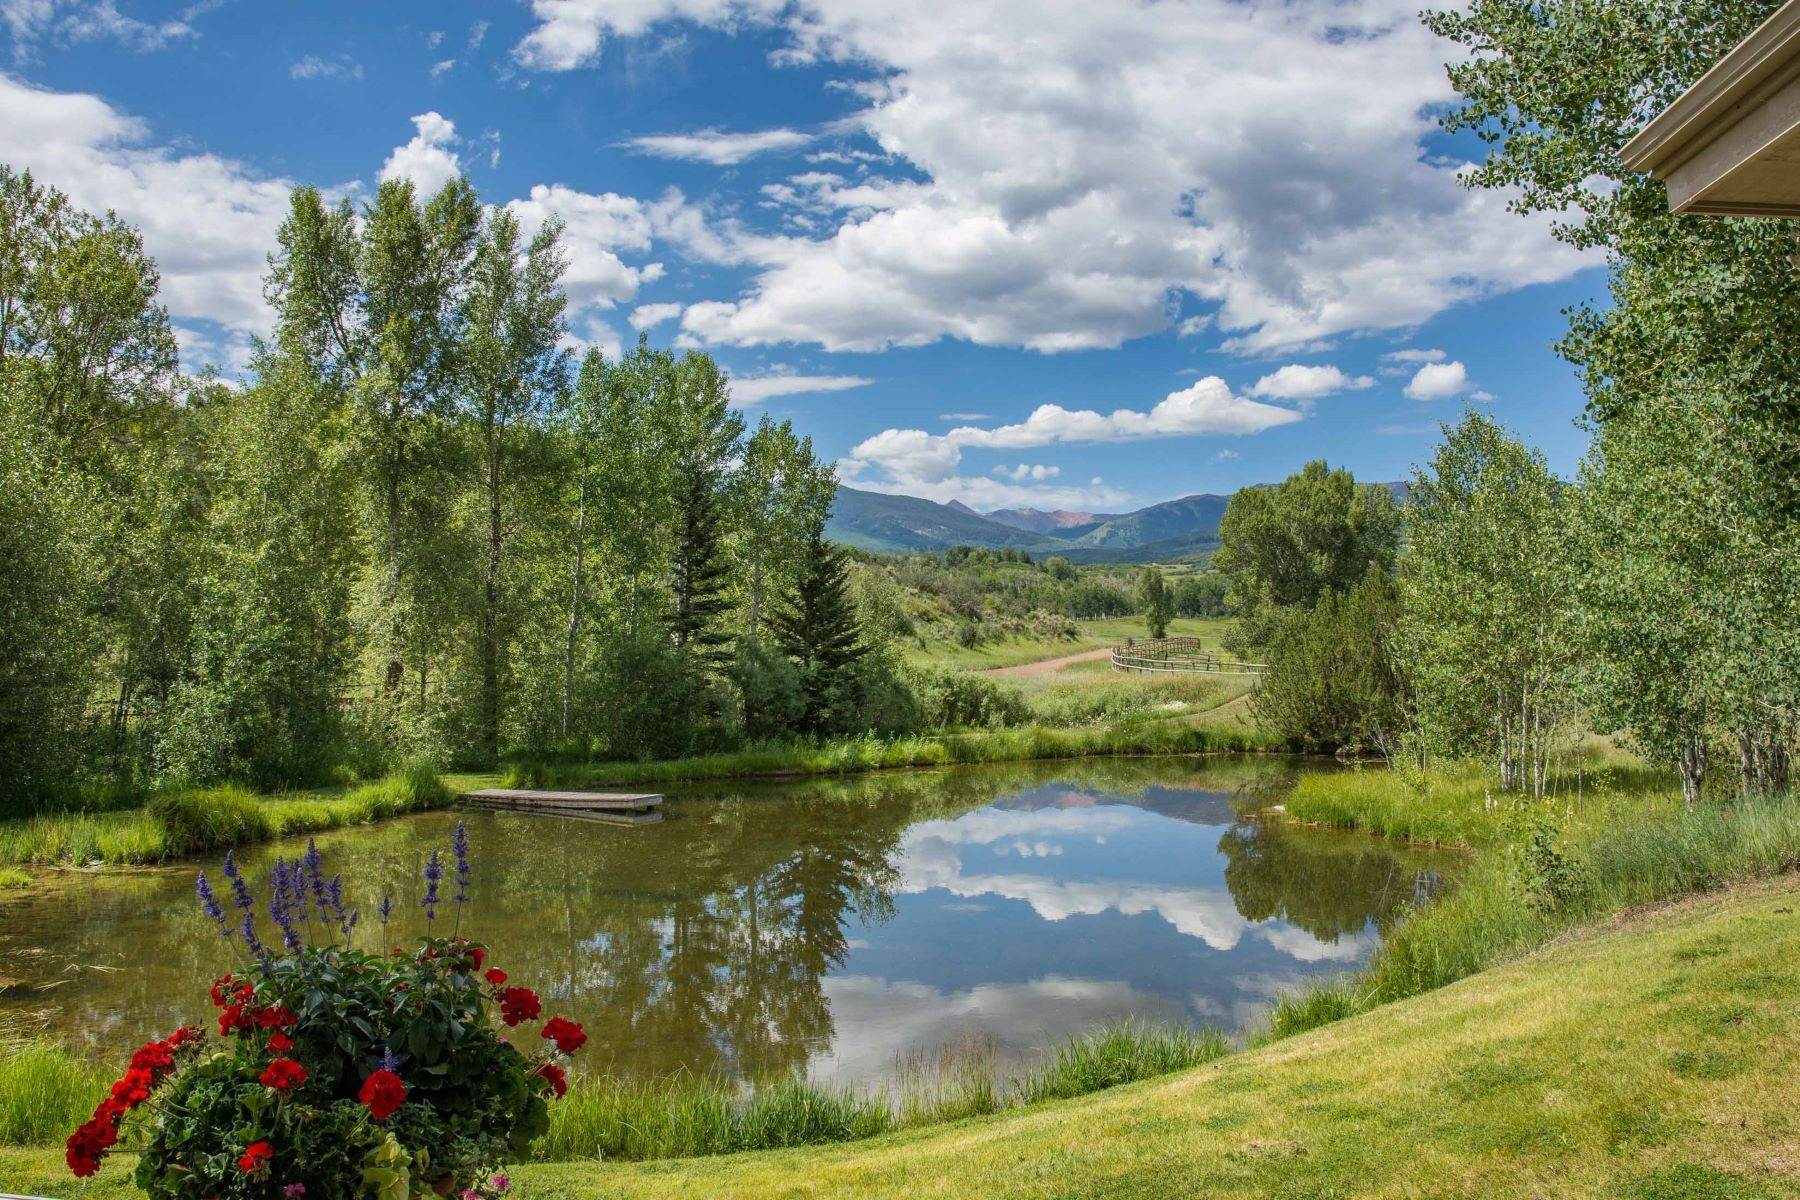 Farm and Ranch Properties для того Продажа на RARE and UNIQUE opportunity to own the heart of the renowned McCabe Ranch! 1321 Elk Creek & TBD McCabe Ranch Old Snowmass, Колорадо 81654 Соединенные Штаты